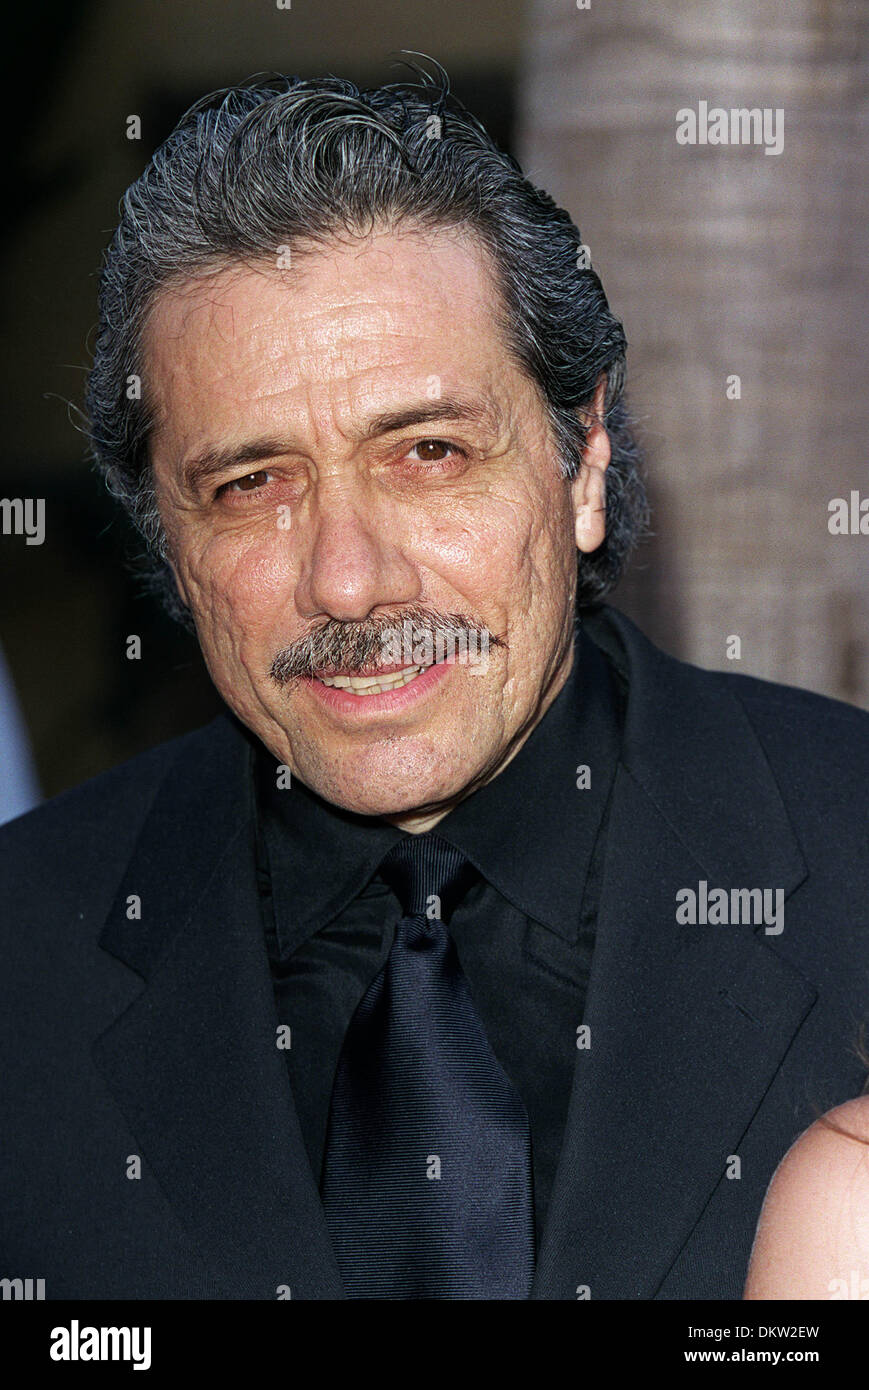 EDWARD JAMES OLMOS.FILM ACTOR.HOLLYWOOD, LOS ANGELES, USA.28/07/2001.BL29D34AC. Stock Photo